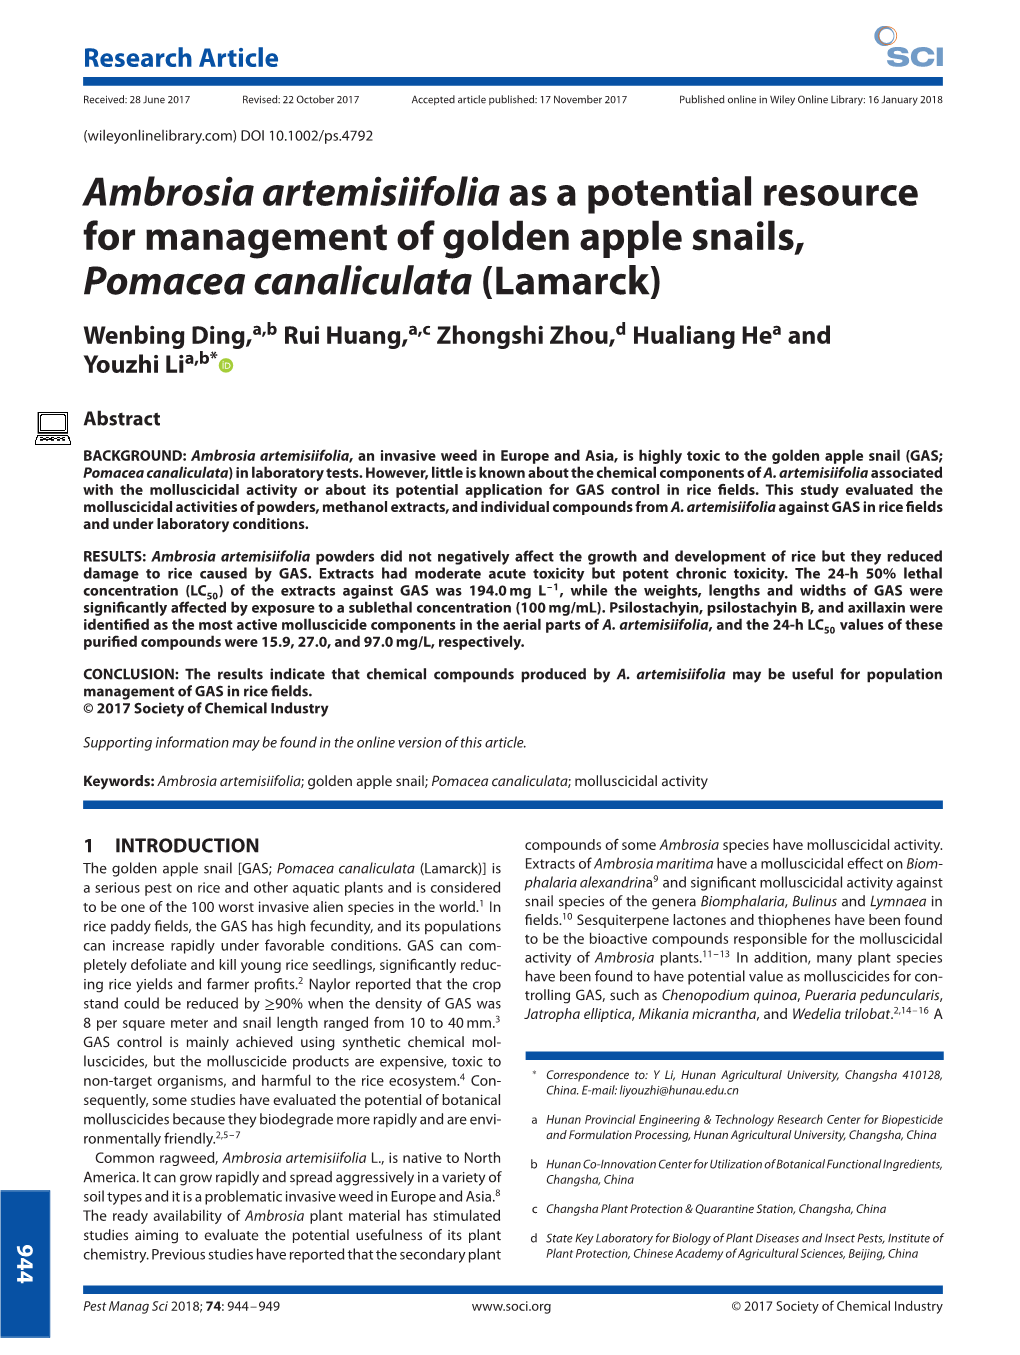 Ambrosia Artemisiifolia As a Potential Resource for Management of Golden